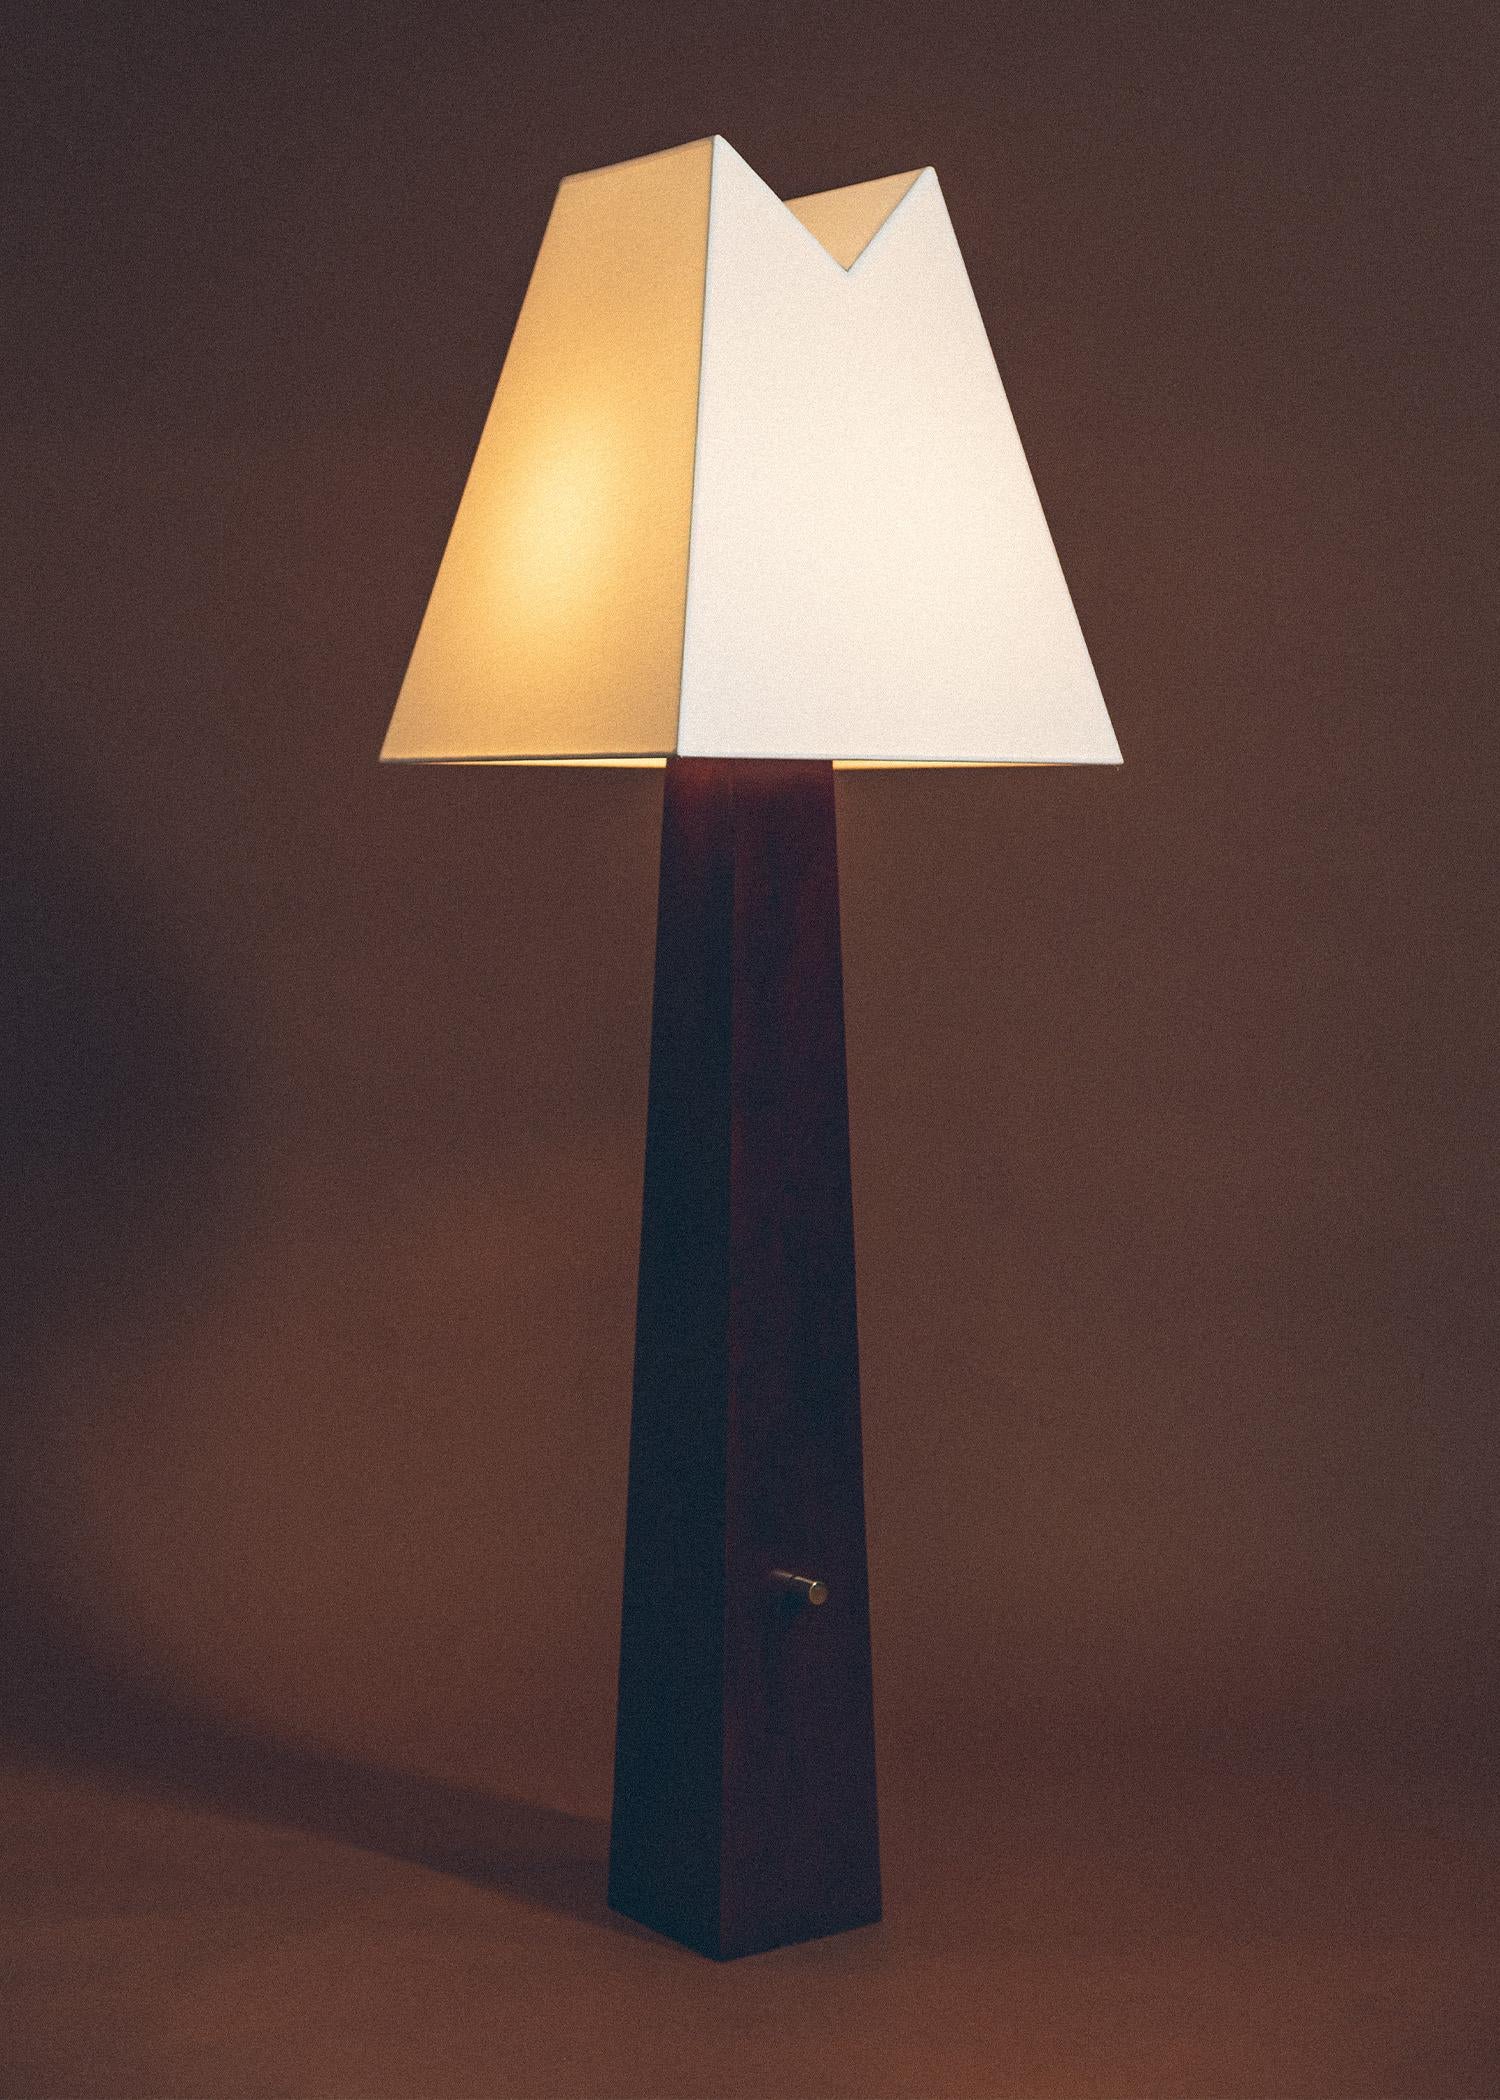 Born of nostalgia, the Alpine Lamp echoes natural forms and mountainous contours. The natural wooden base grounds the piece in earthy materials, evoking the altitude of Utah forests; the “V” of the lampshade mirrors the notch in Lone Peak, a